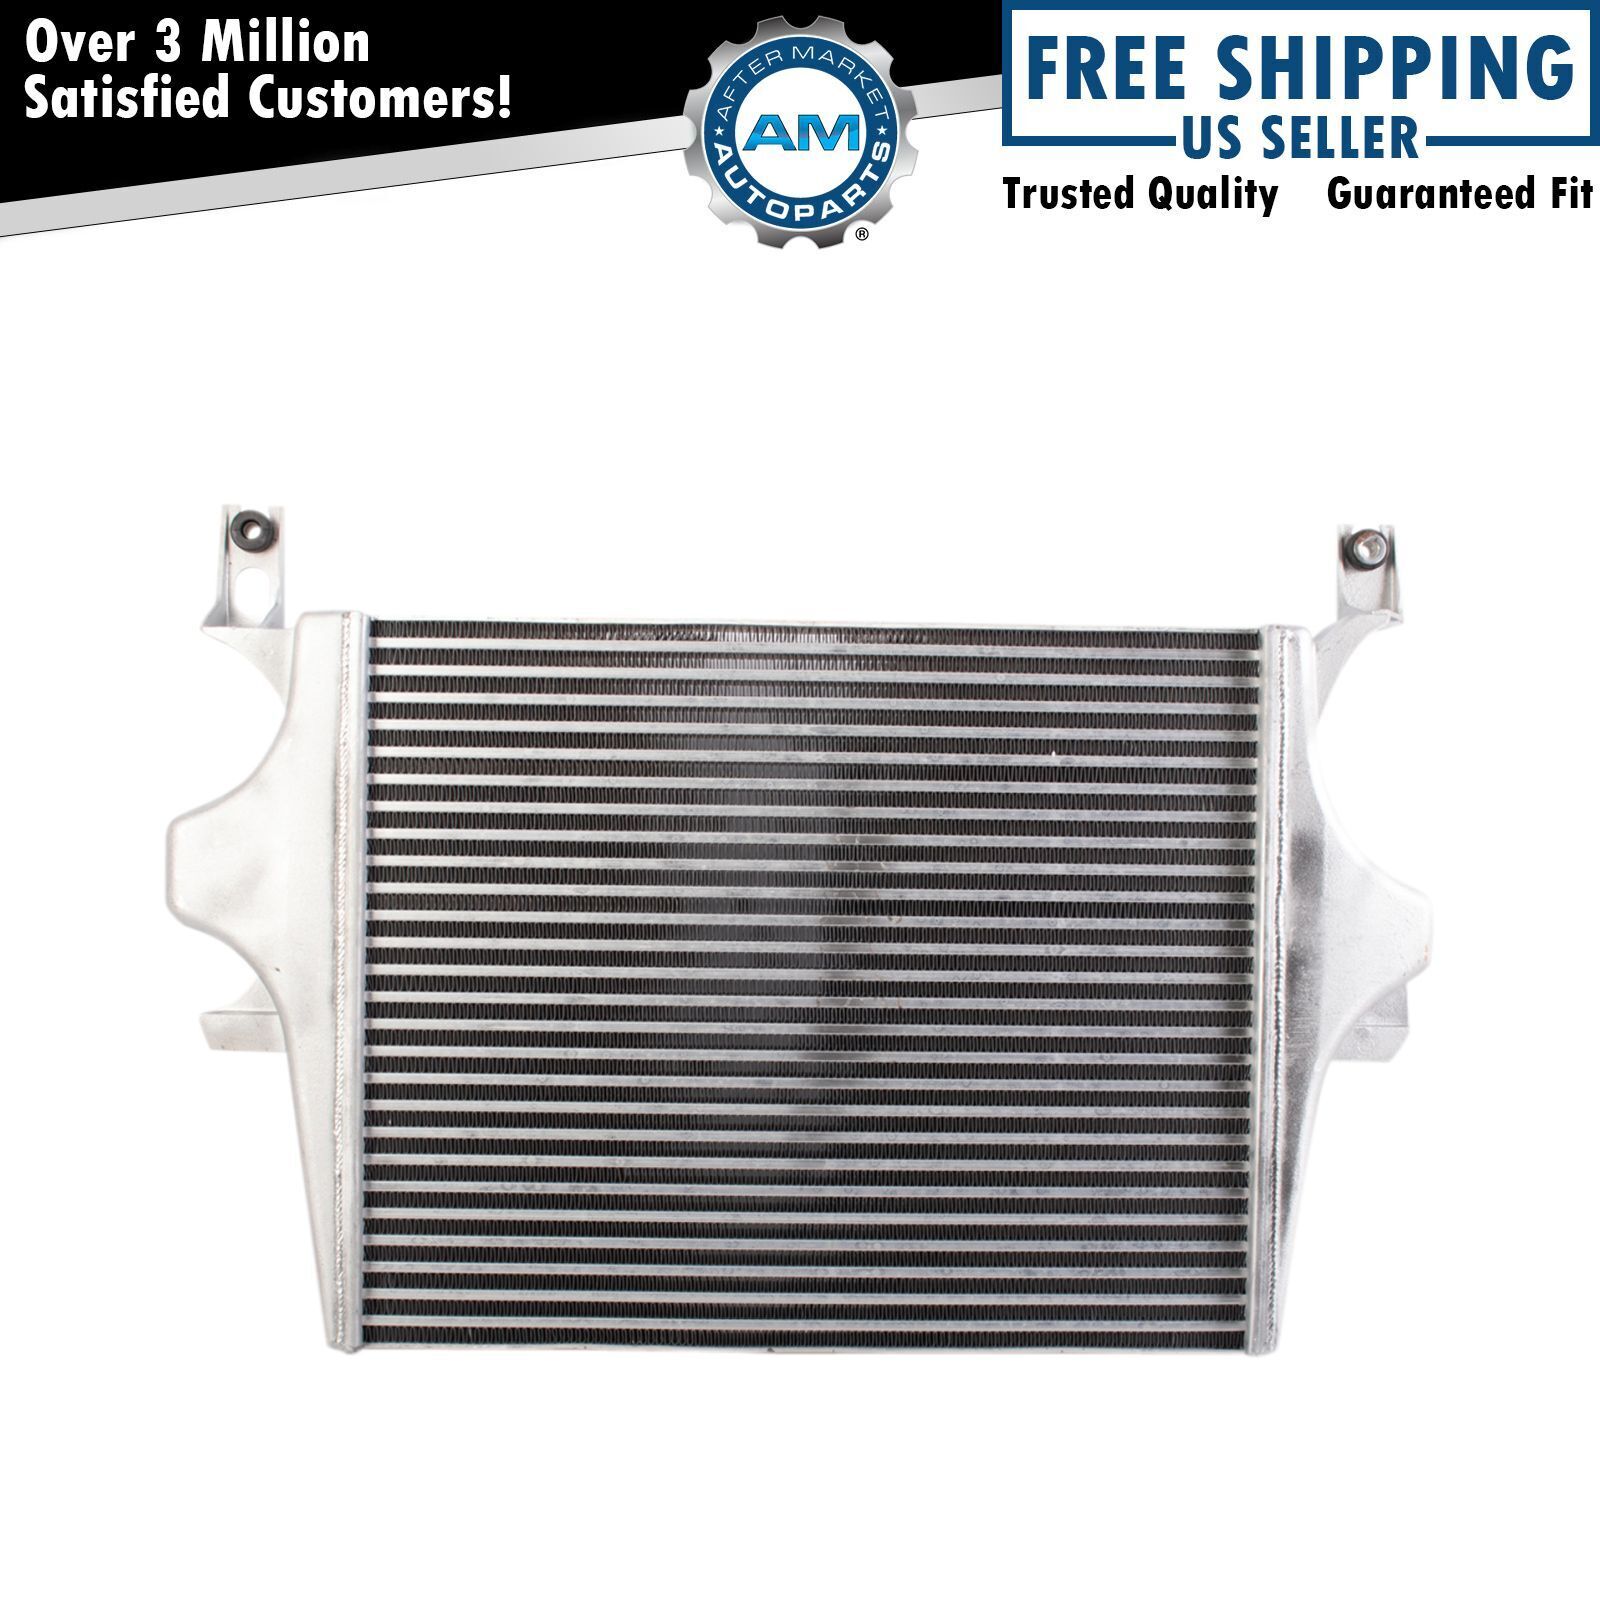 Turbo Intercooler for Ford Excursion F250 F350 6.0L Diesel